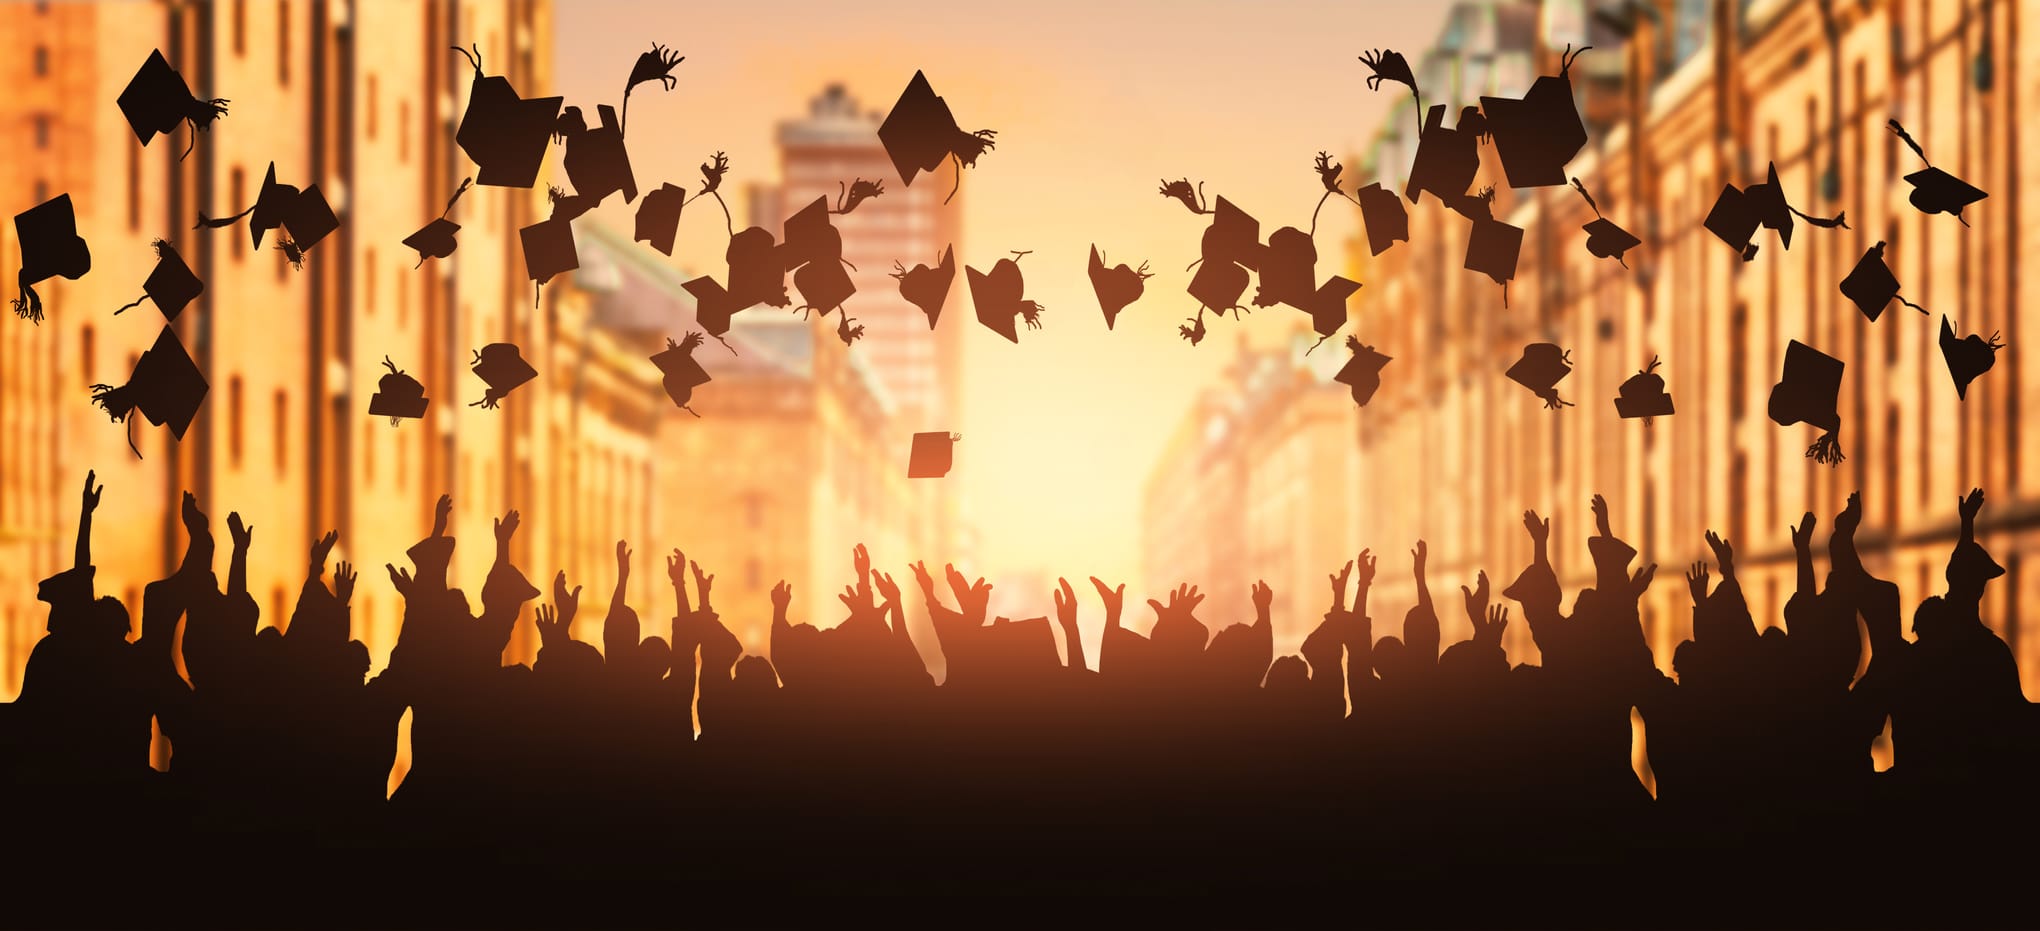 How To Throw A Memorable Graduation Party